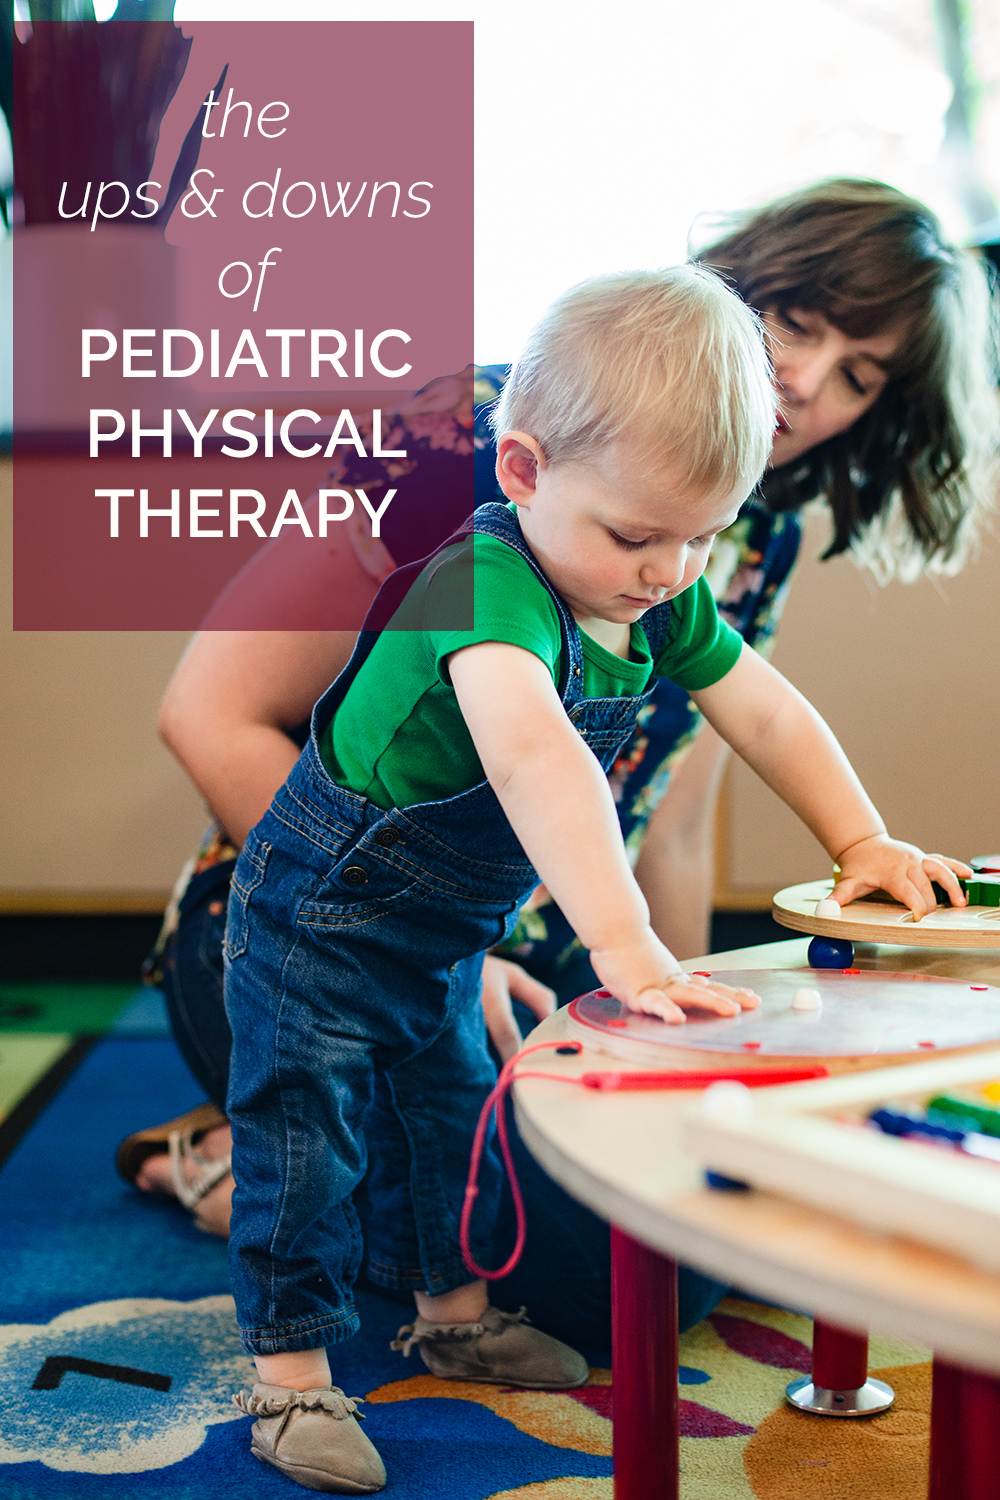 Pediatric Physical Therapy, Part 2: The Ups + Downs